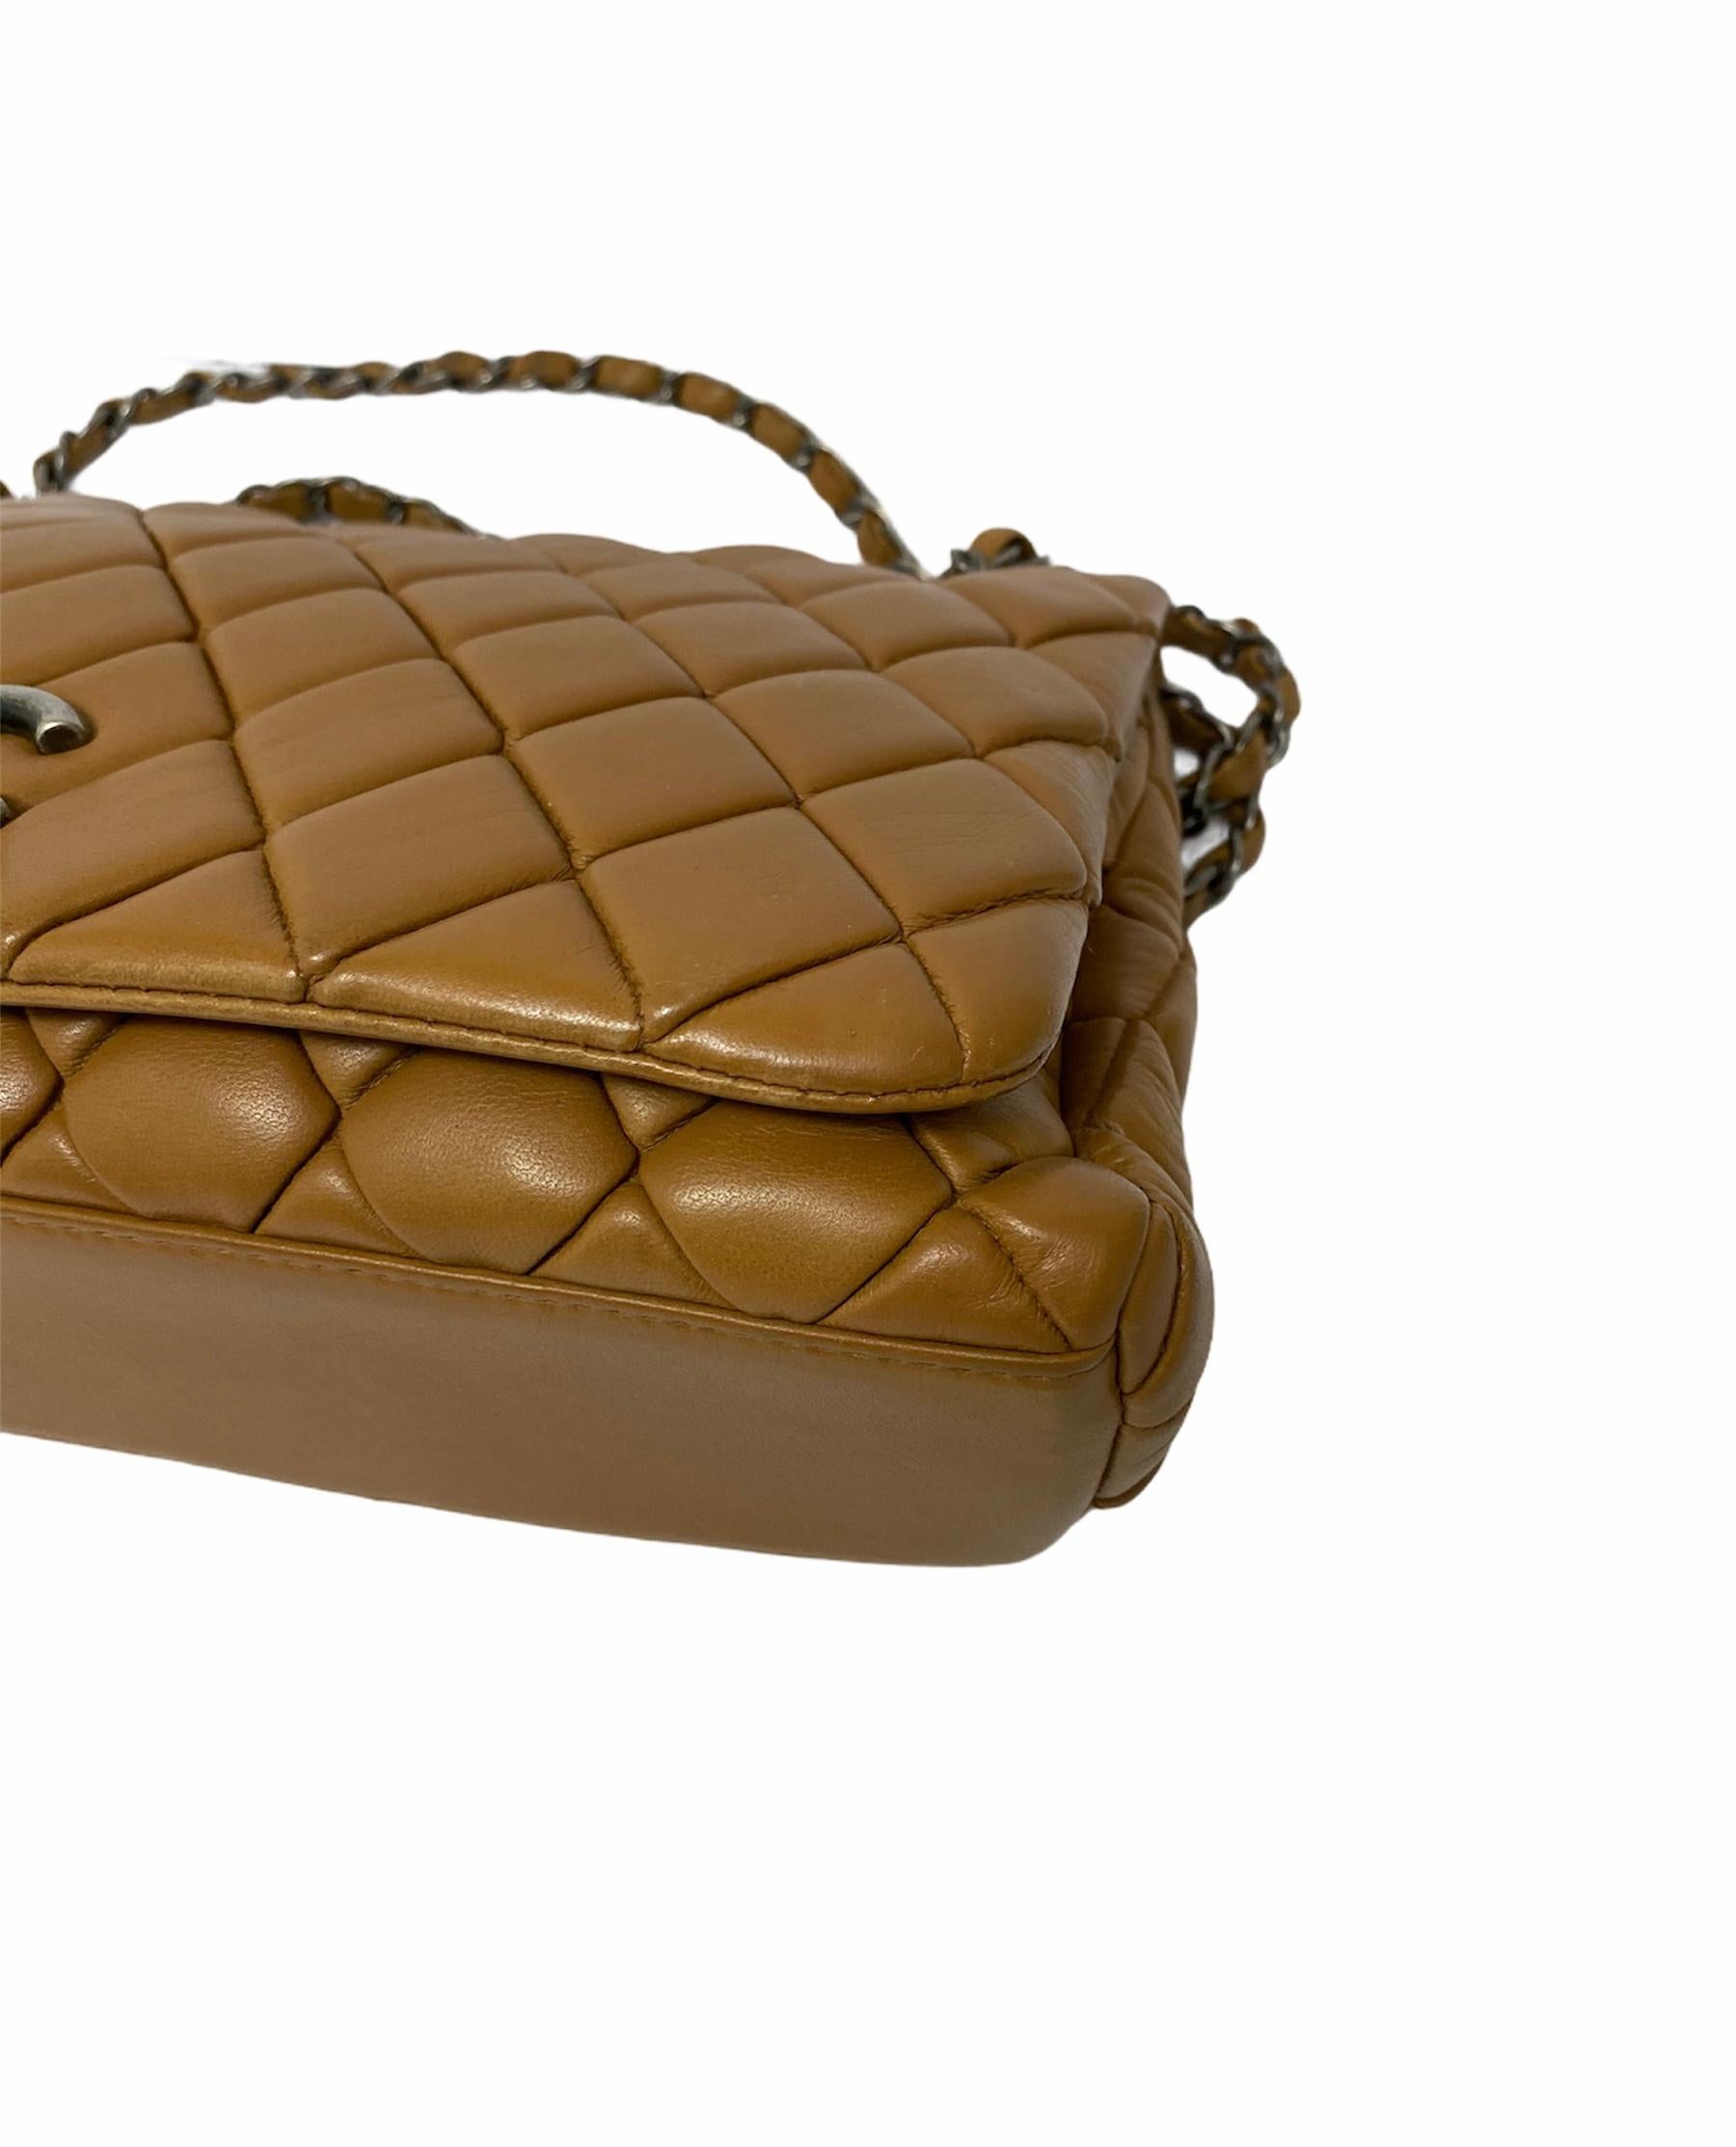 Chanel Flap Bag in Brown Leather with Silver Hardware 3